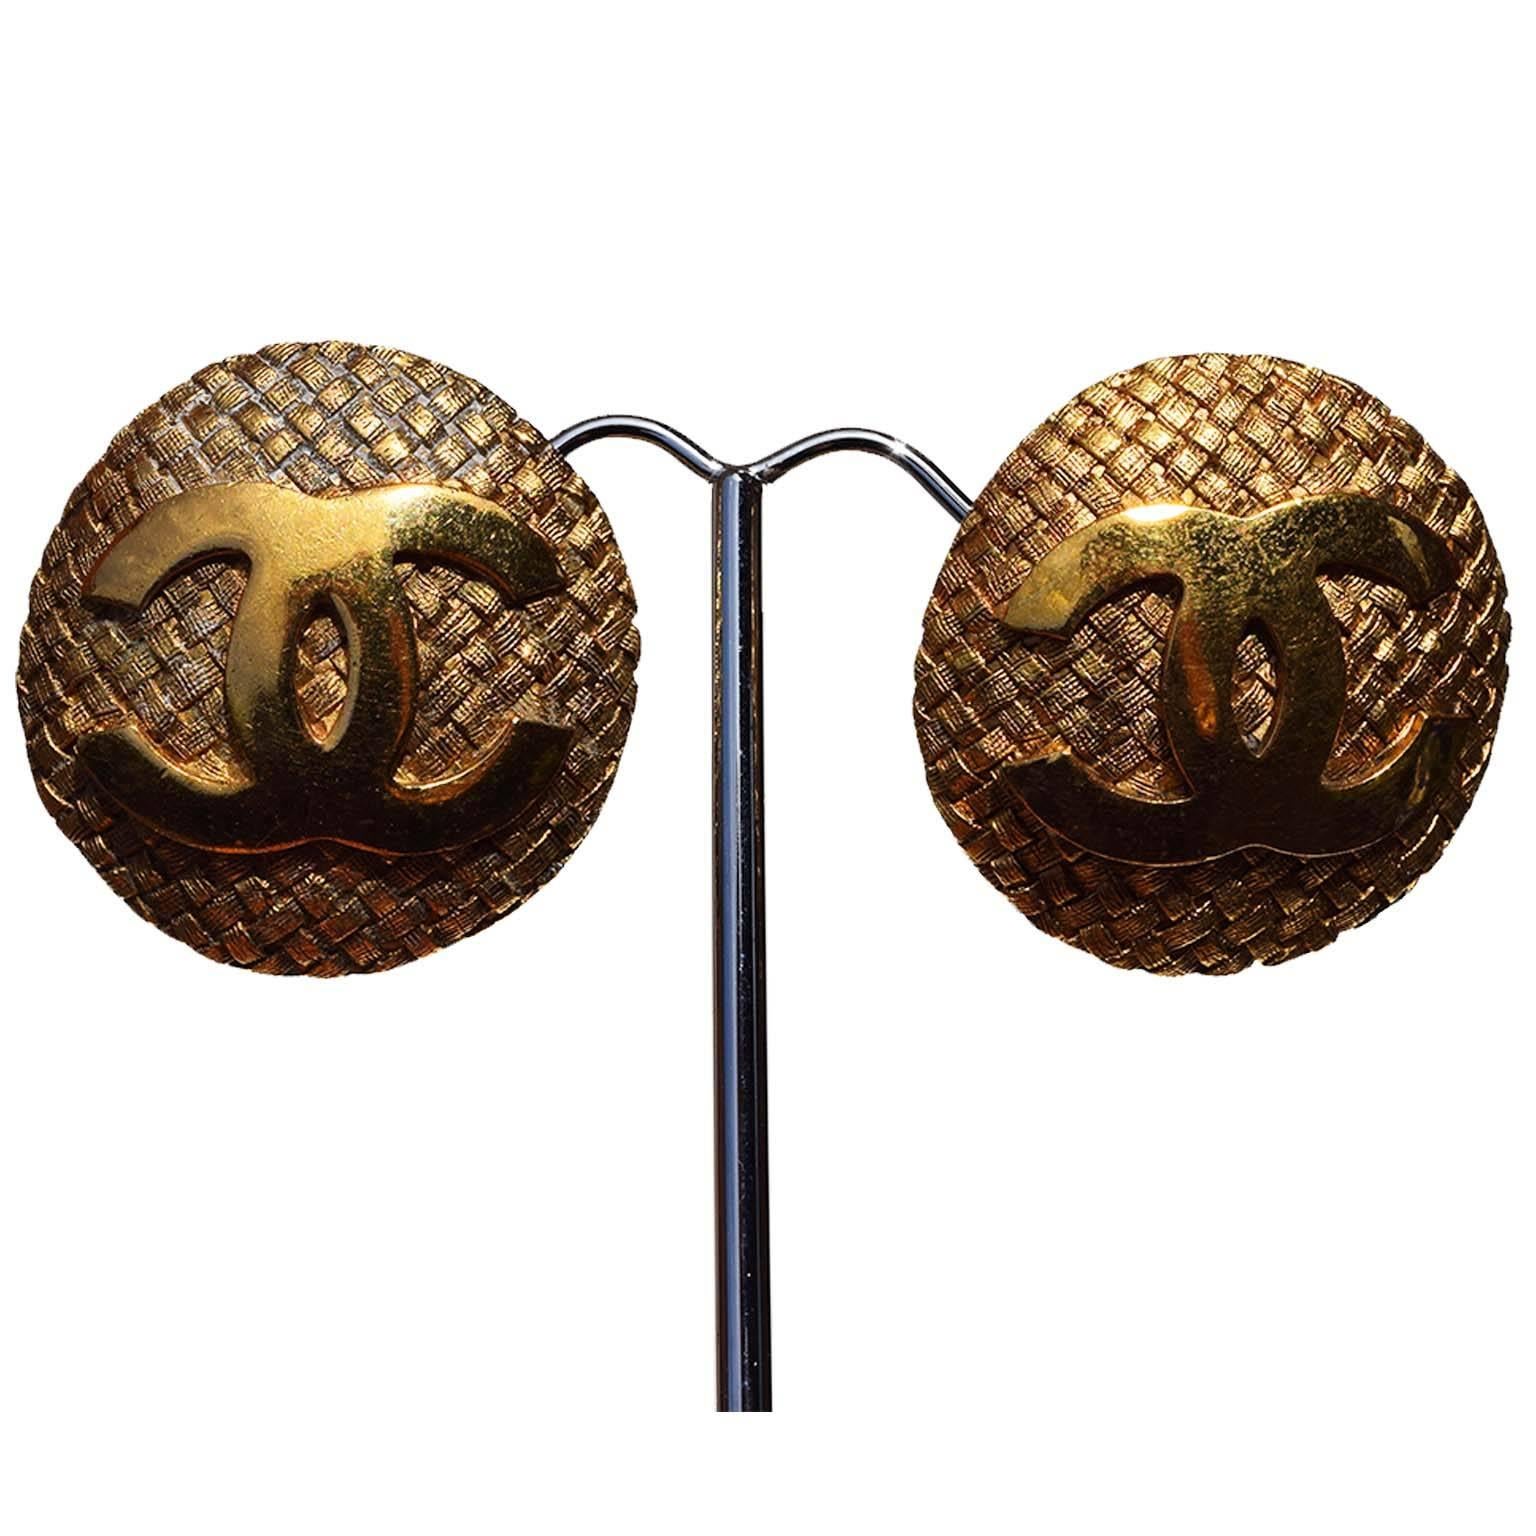 Chanel vintage clipon earrings. Large discs with CC logo in gold on basket weave textured base. Collection 29 (1992) designed by Victoire de Castellane, who was hired by Lagerfeld to oversee the design of Chanel's costume jewellery.